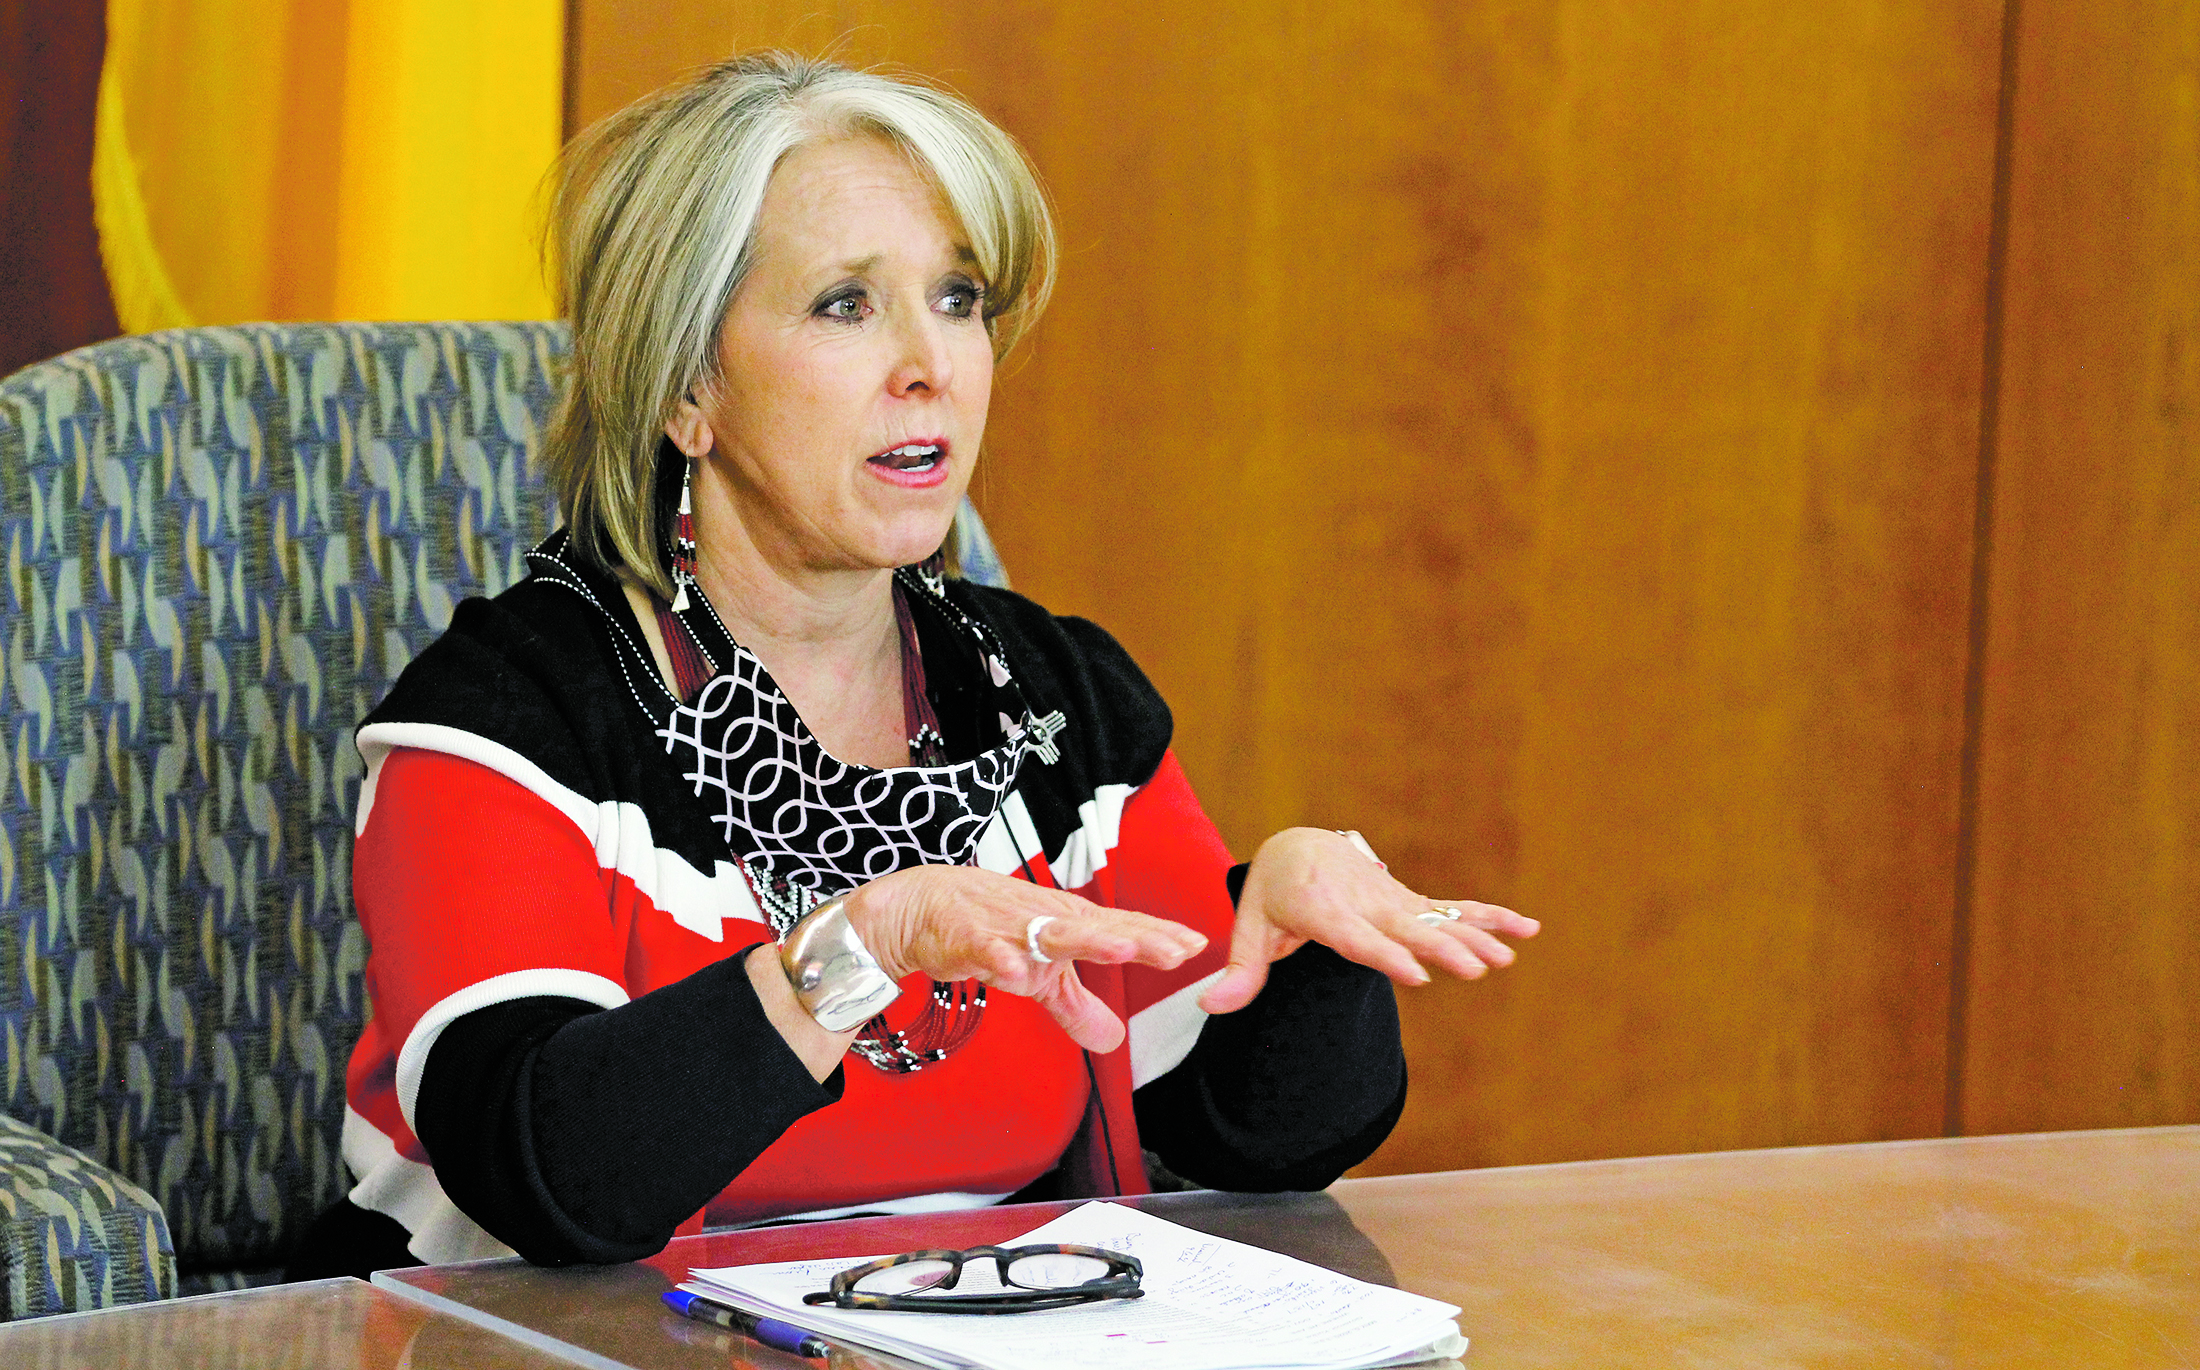 Gov. Lujan Grisham: ‘Stay the course, stay in your bubble’